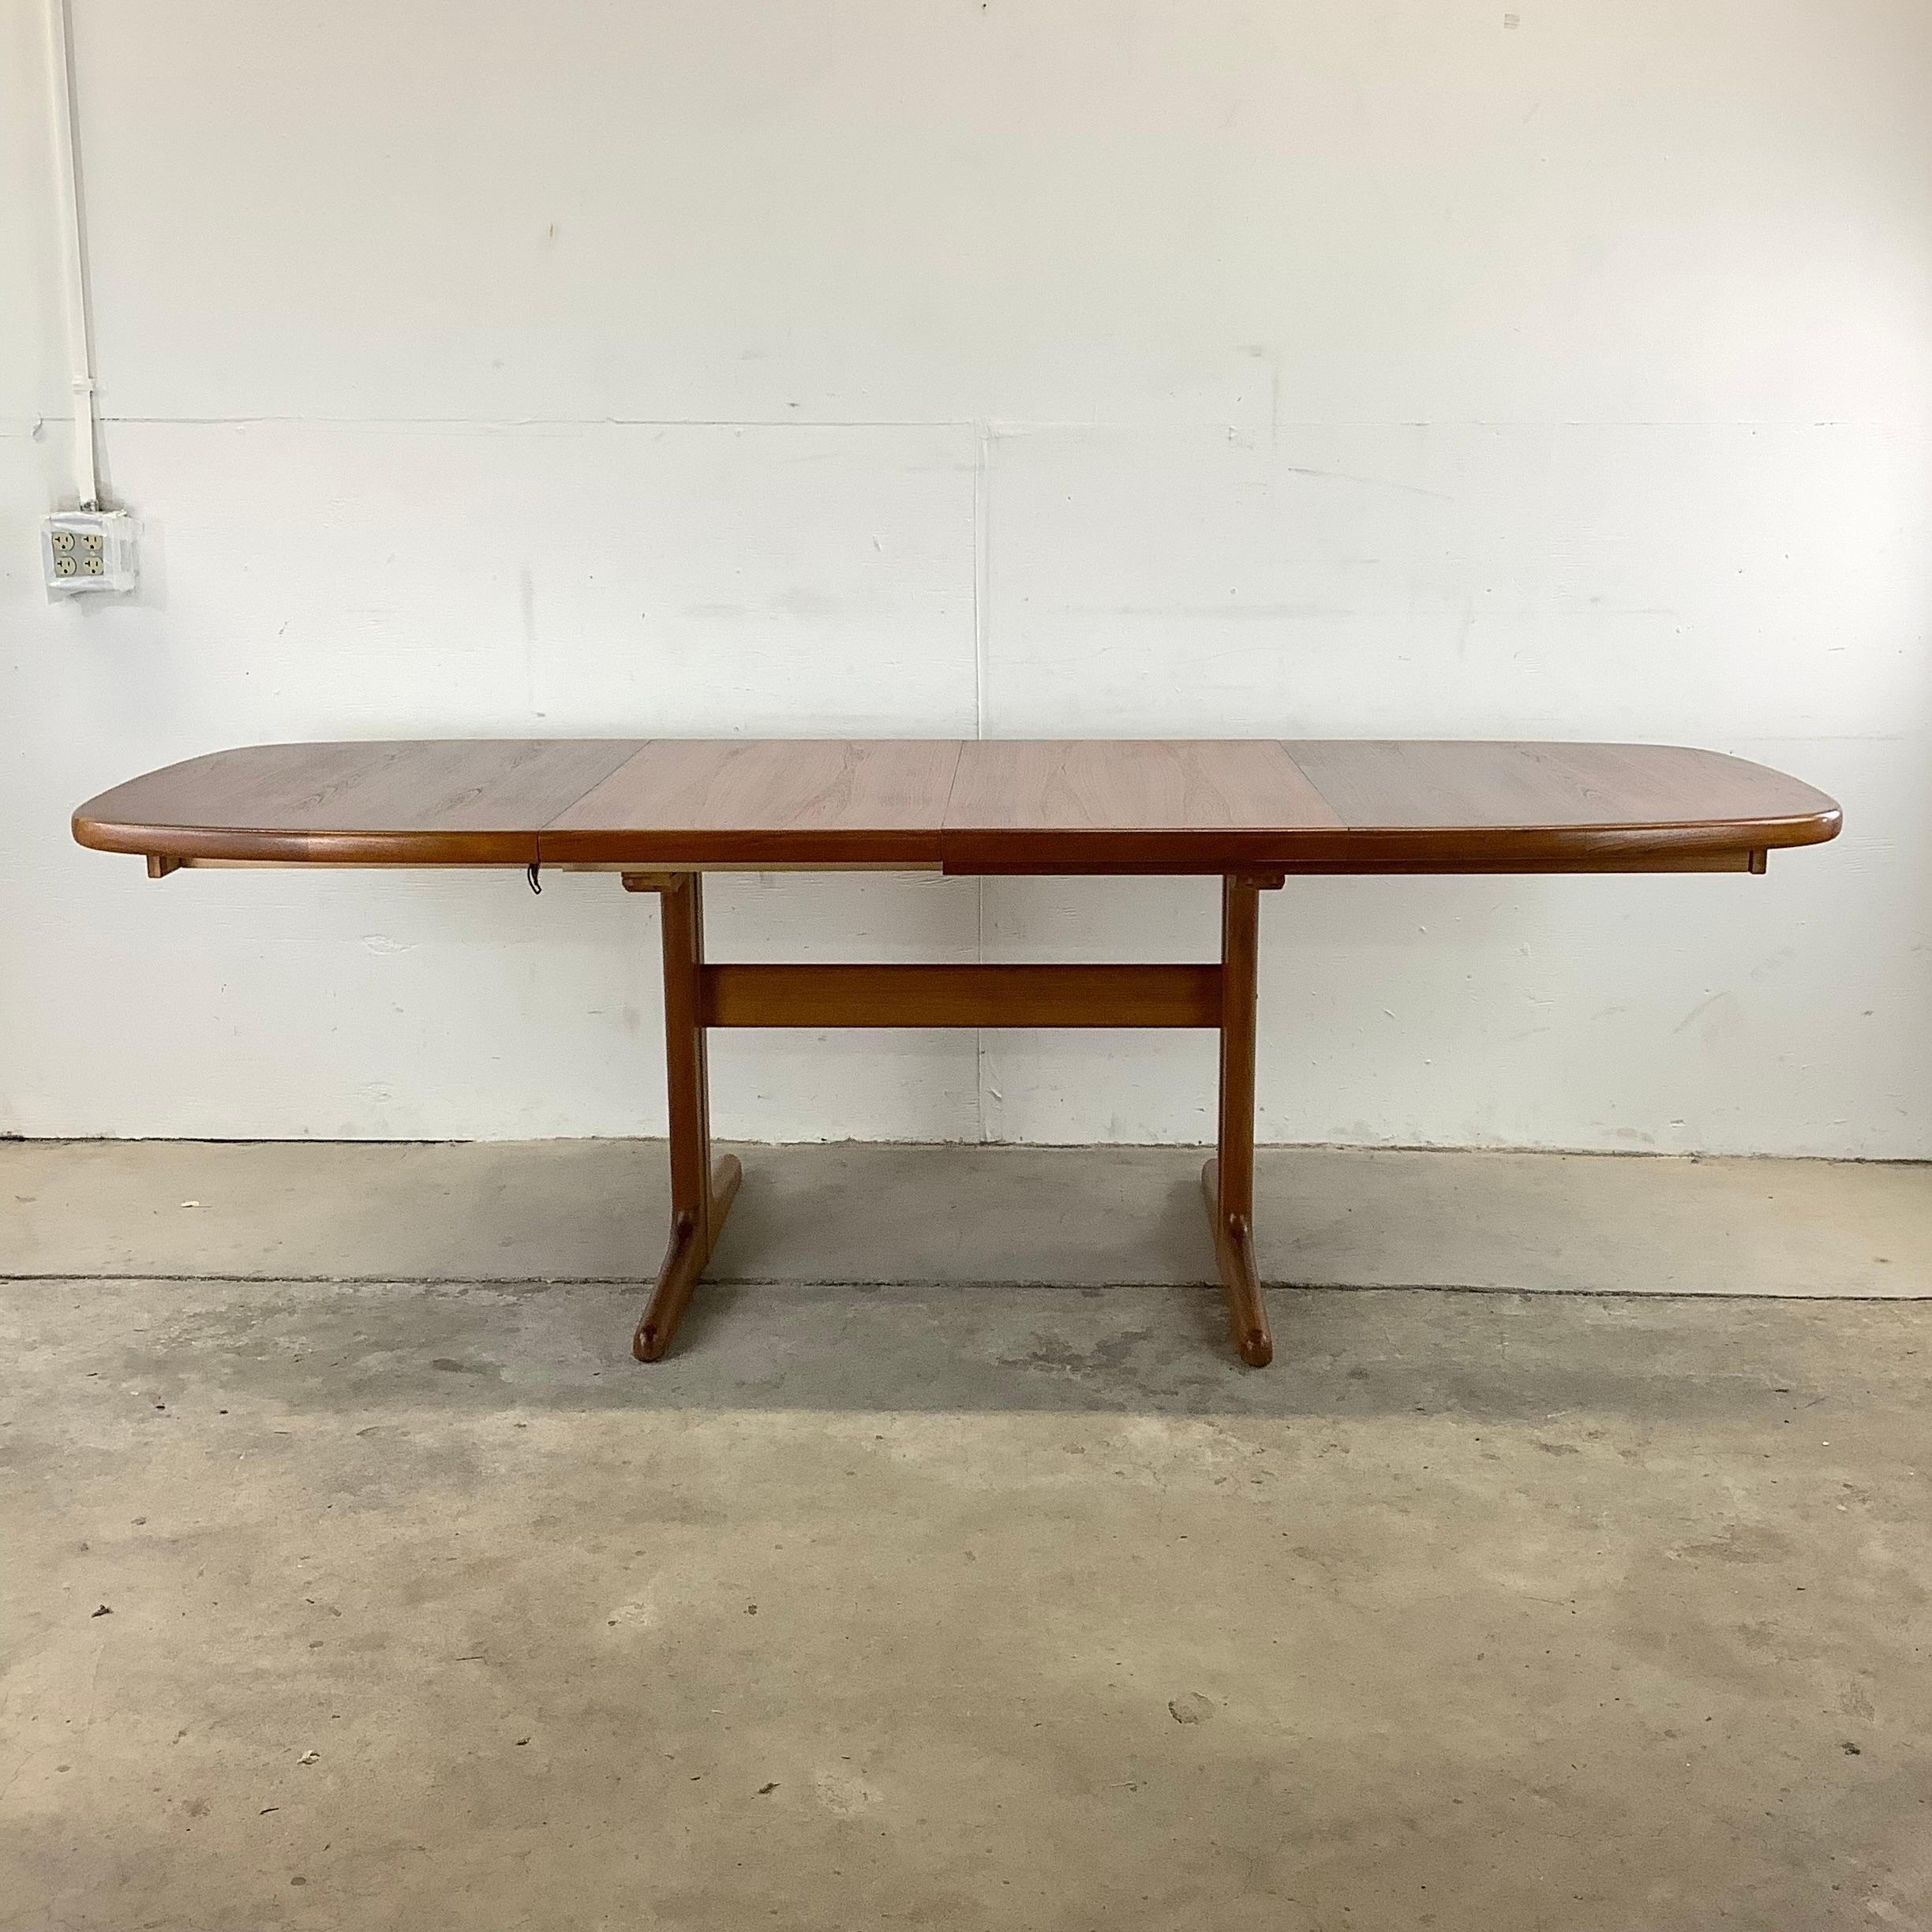 20th Century Scandinavian Modern Teak Oval Dining Table with Leaves